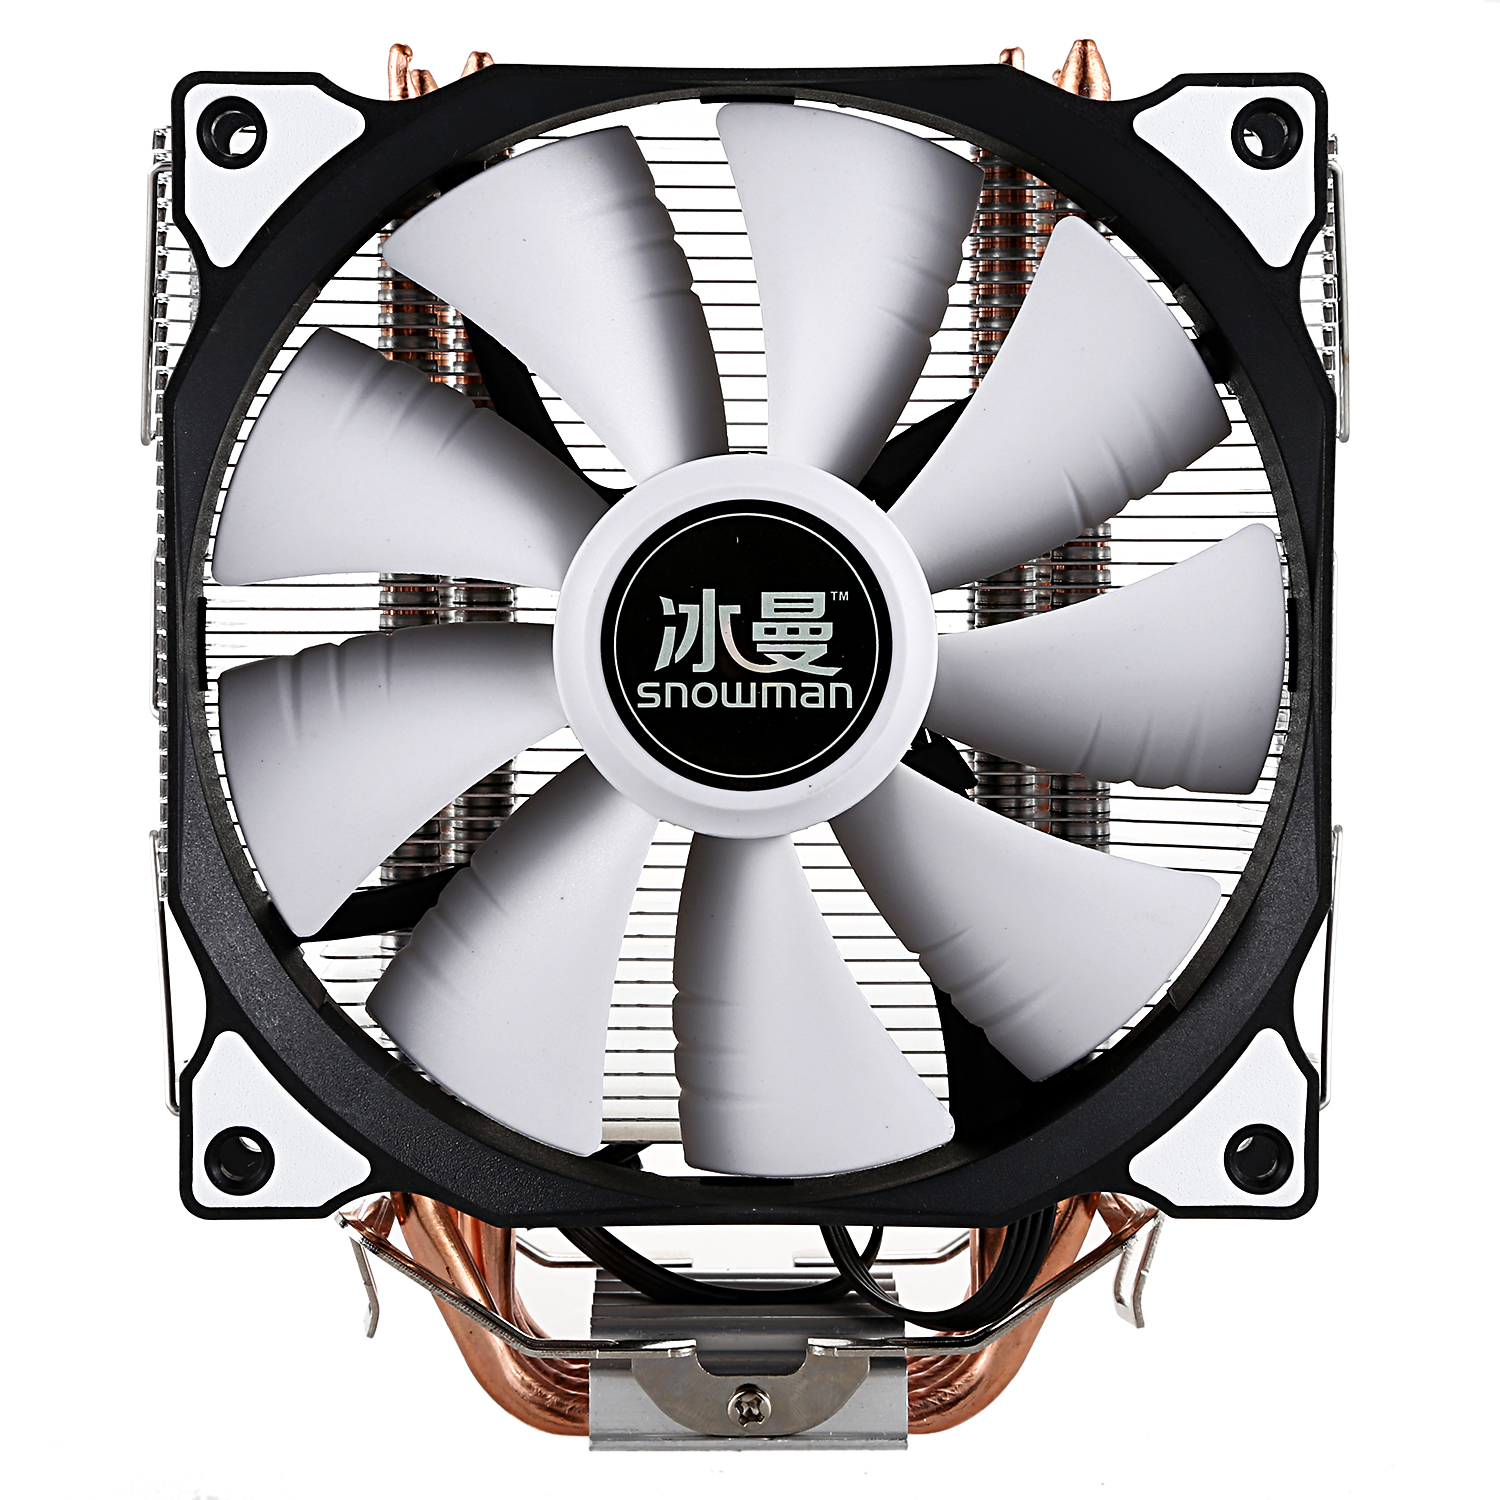 Us 2015 12 Offsnowman Cpu Cooler Master 4 Pure Copper Heat Pipes Freeze Tower Cooling System Cpu Cooling Fan With Pwm Fansfans Cooling for size 1500 X 1500